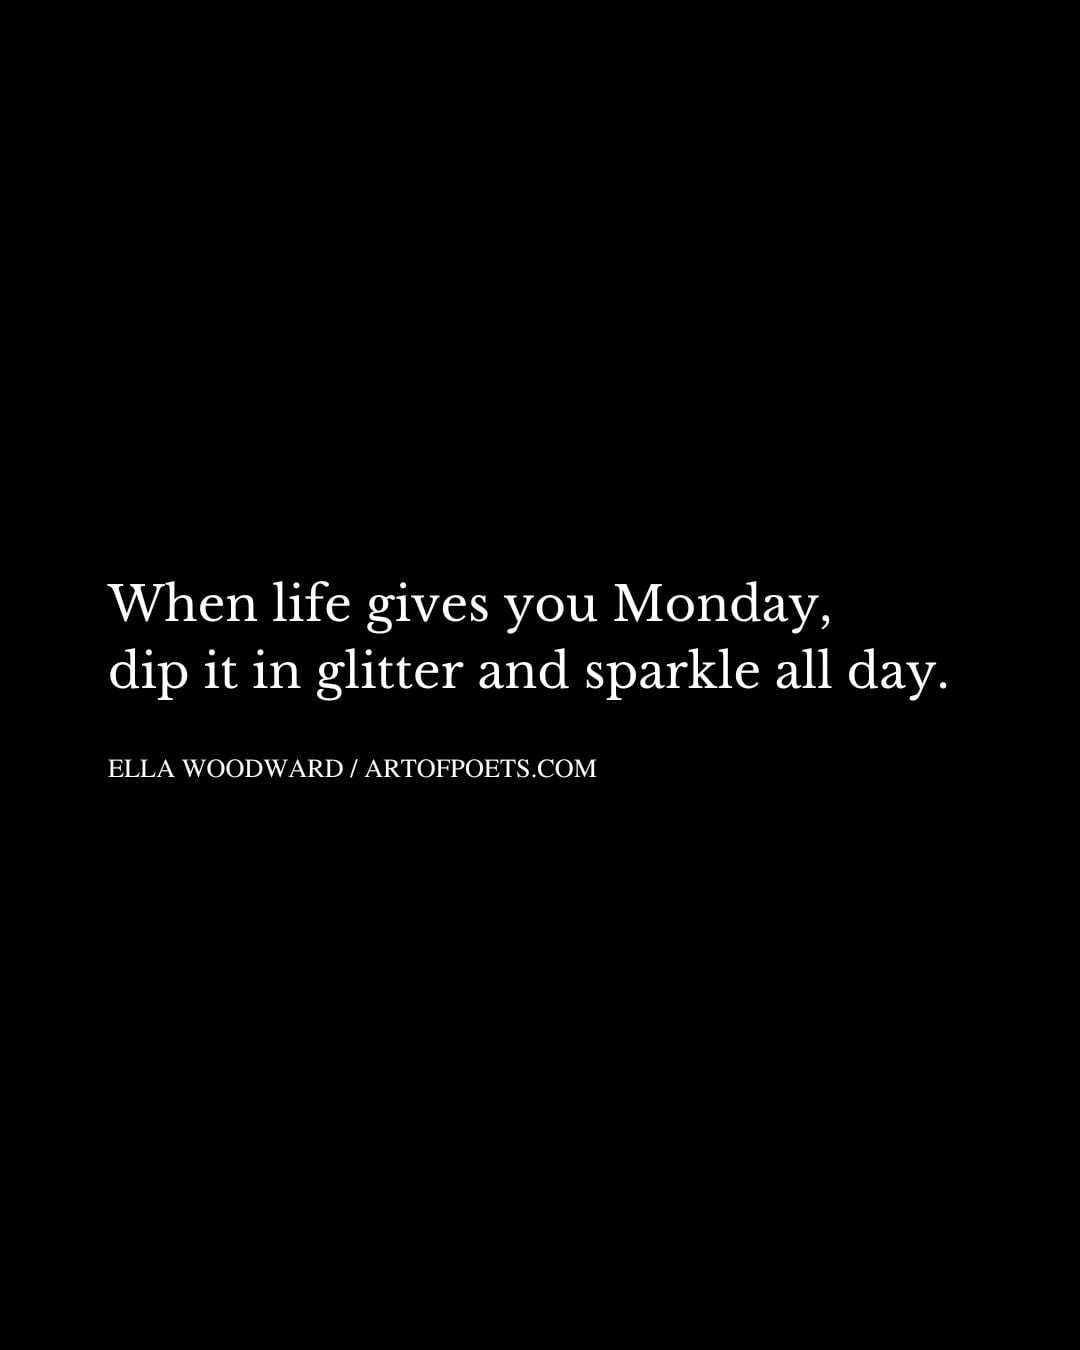 When life gives you Monday dip it in glitter and sparkle all day